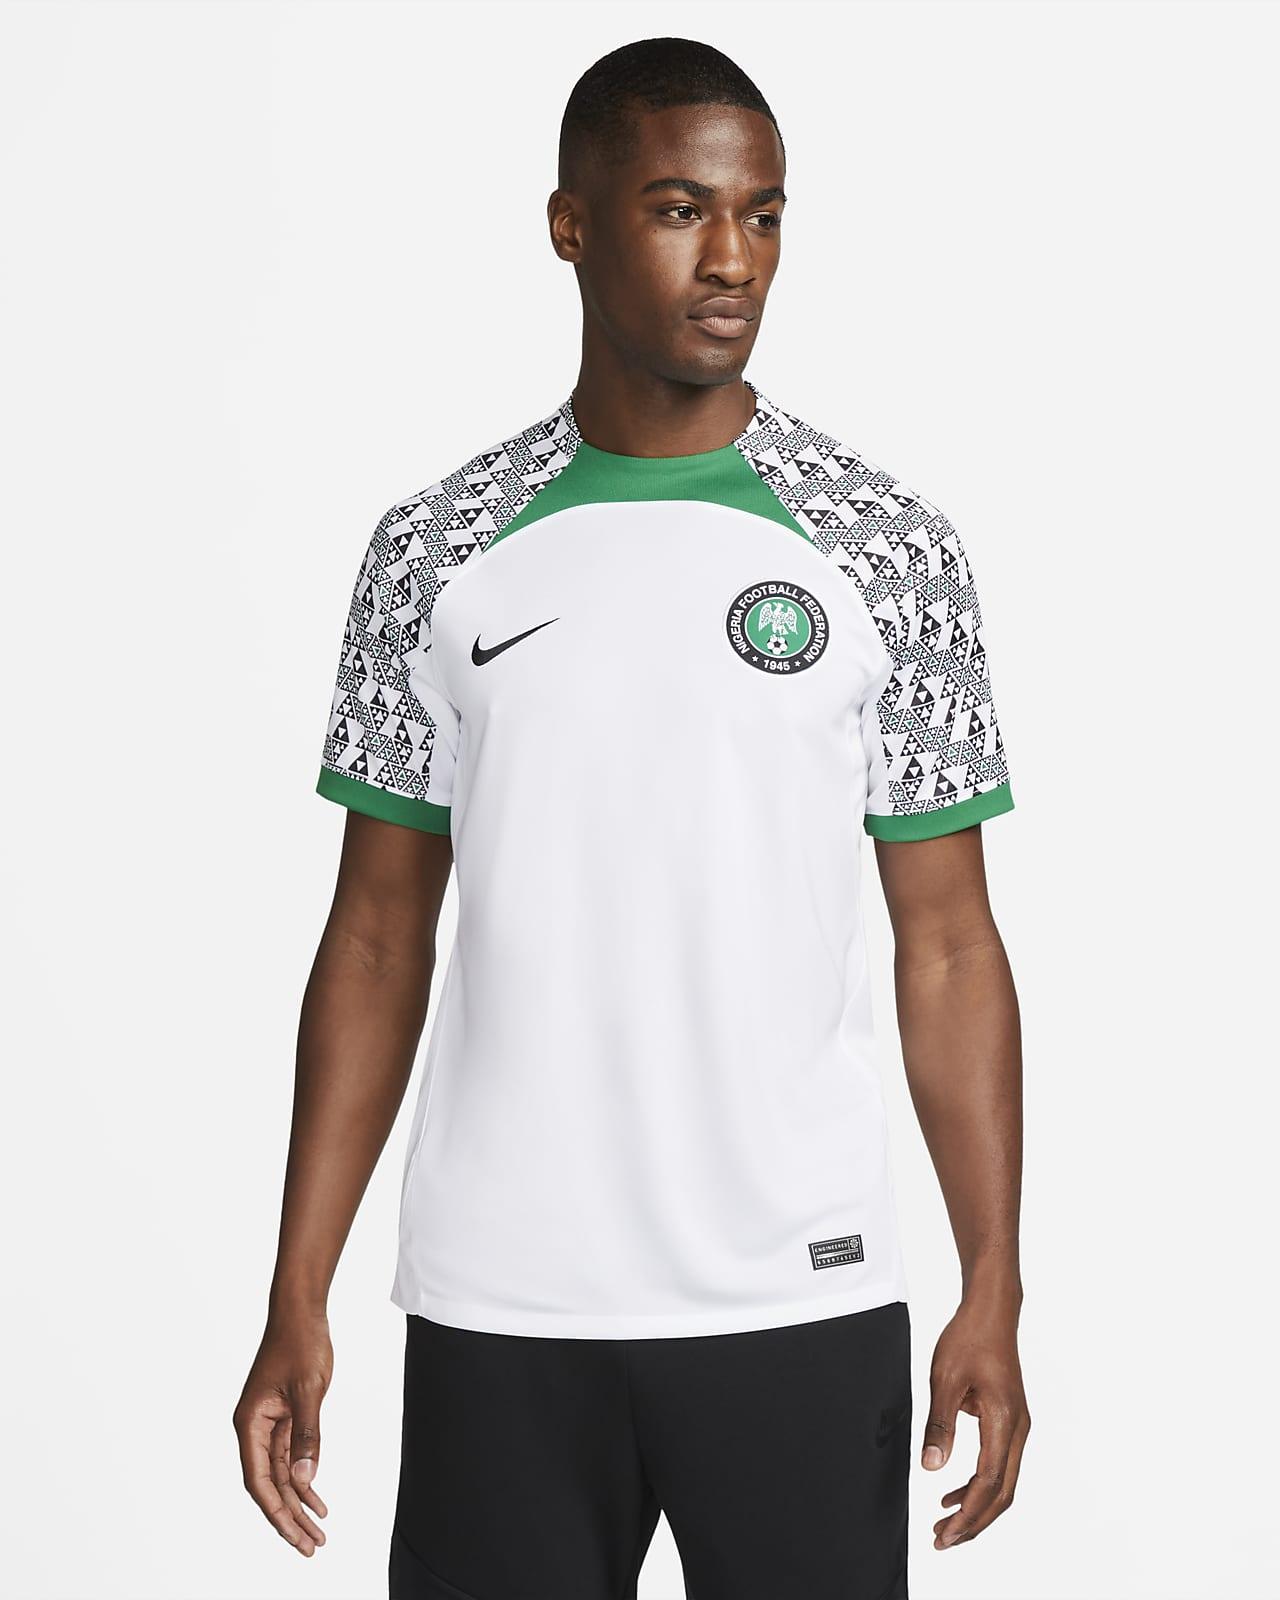 Eagles away jersey